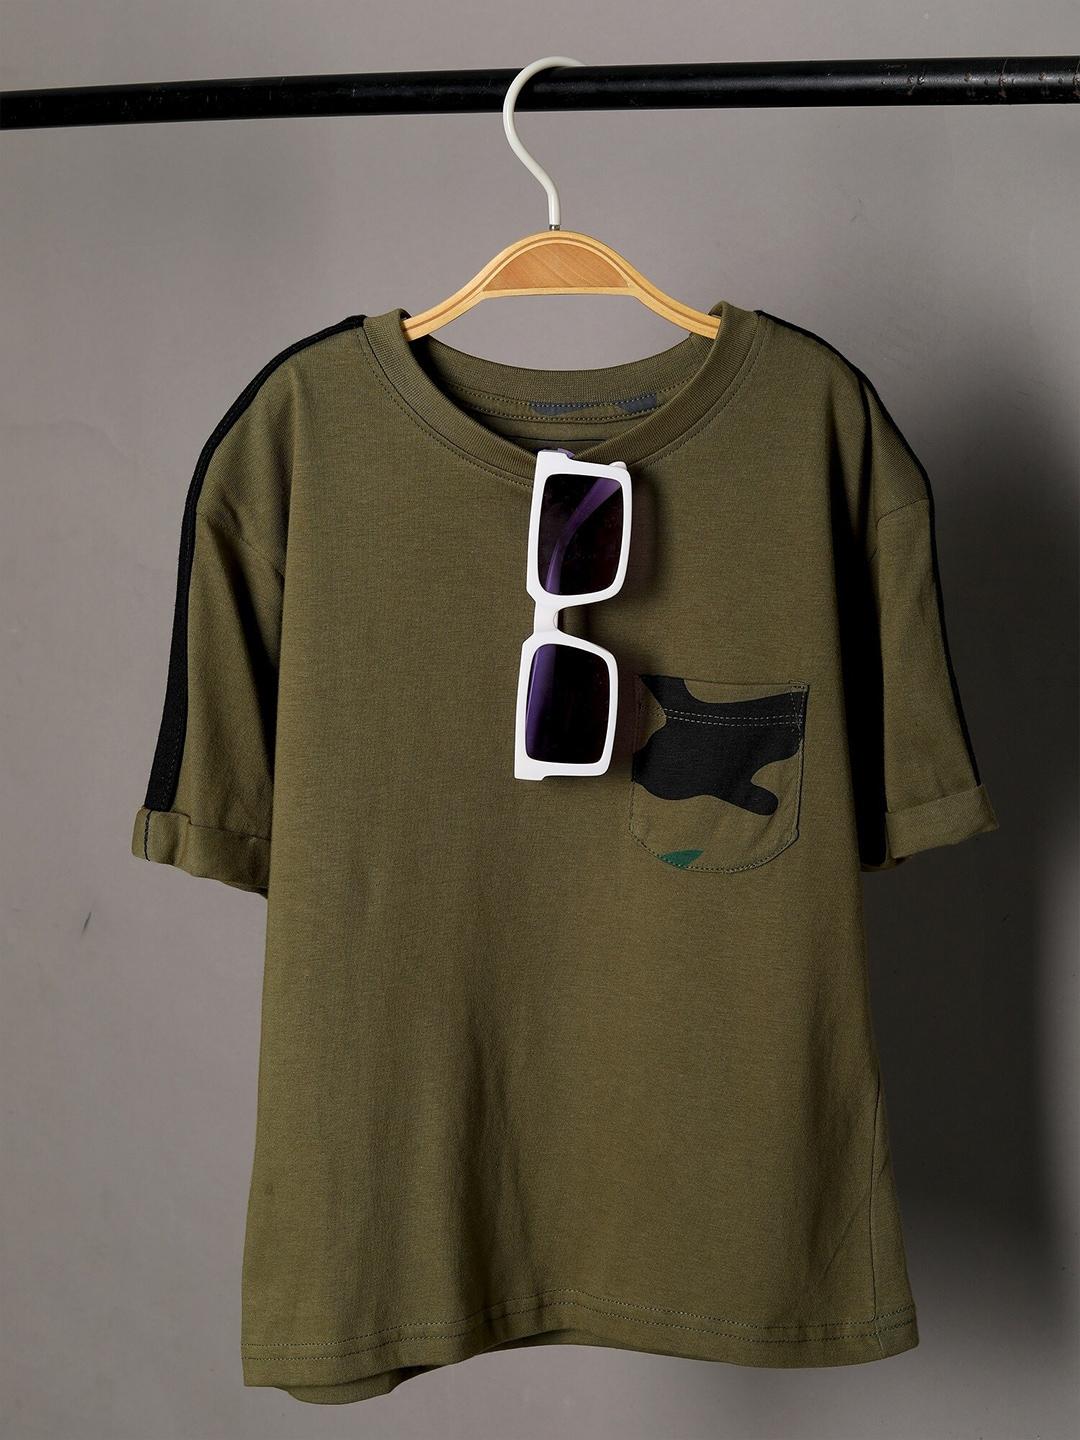 Jumping Joey Boys Olive Green Pure Cotton T-shirt